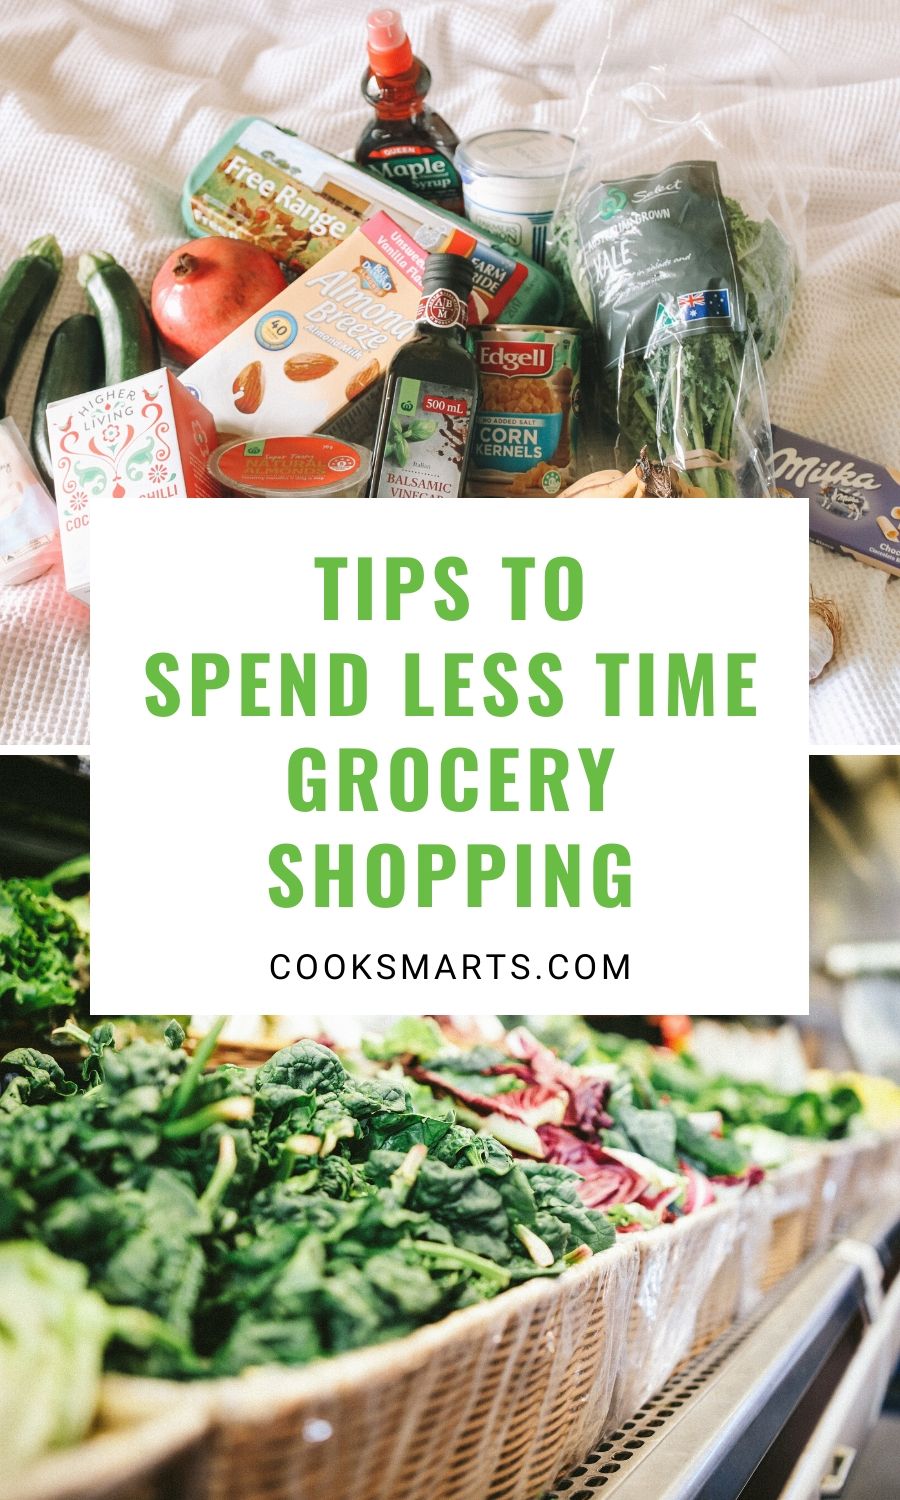 4 Tips to Grocery Shop Less During the Quarantine | Cook Smarts